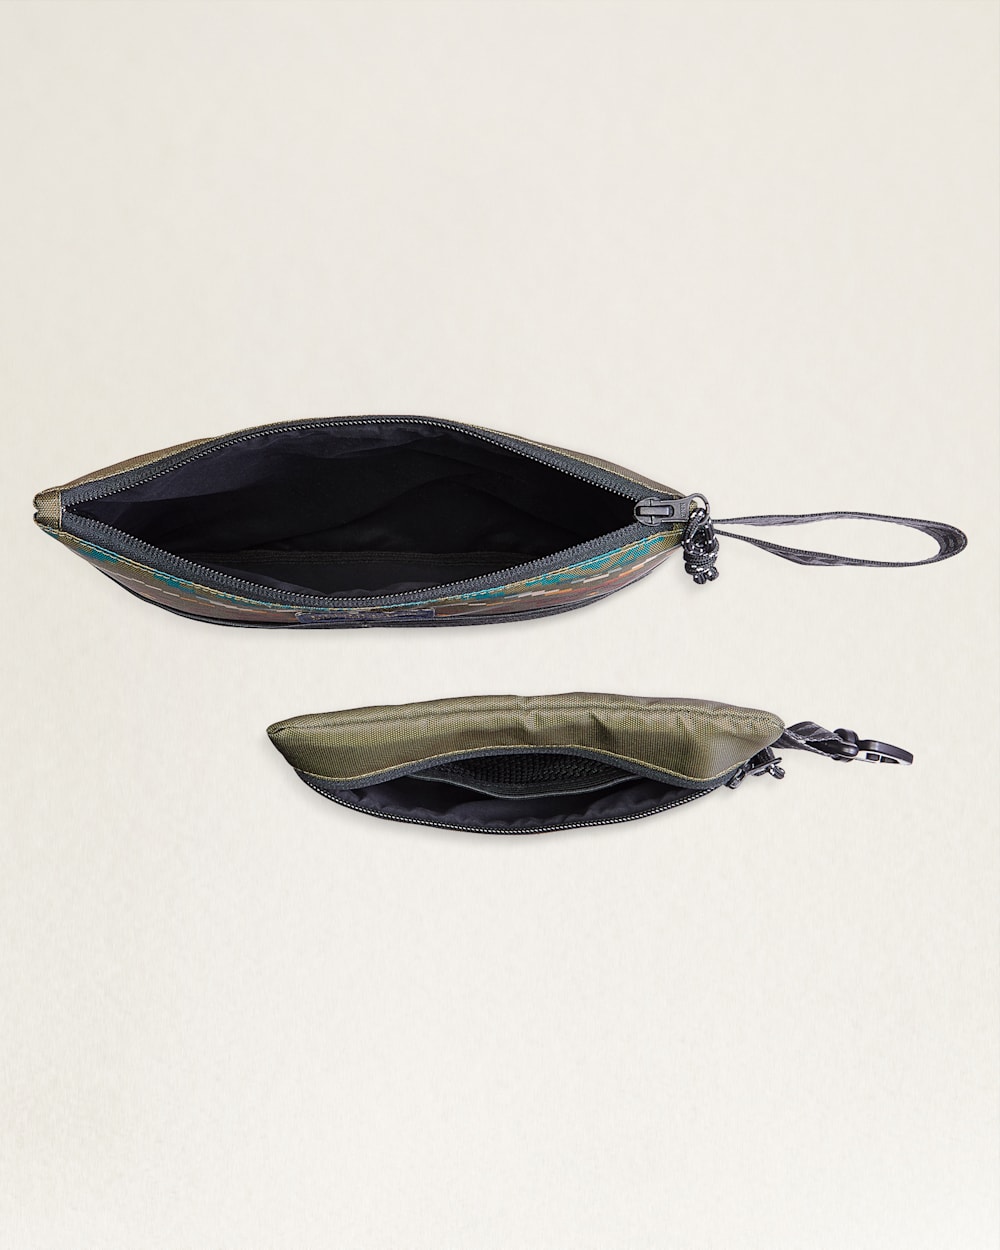 ALTERNATE VIEW OF CARICO LAKE ZIP POUCH SET IN OLIVE image number 3